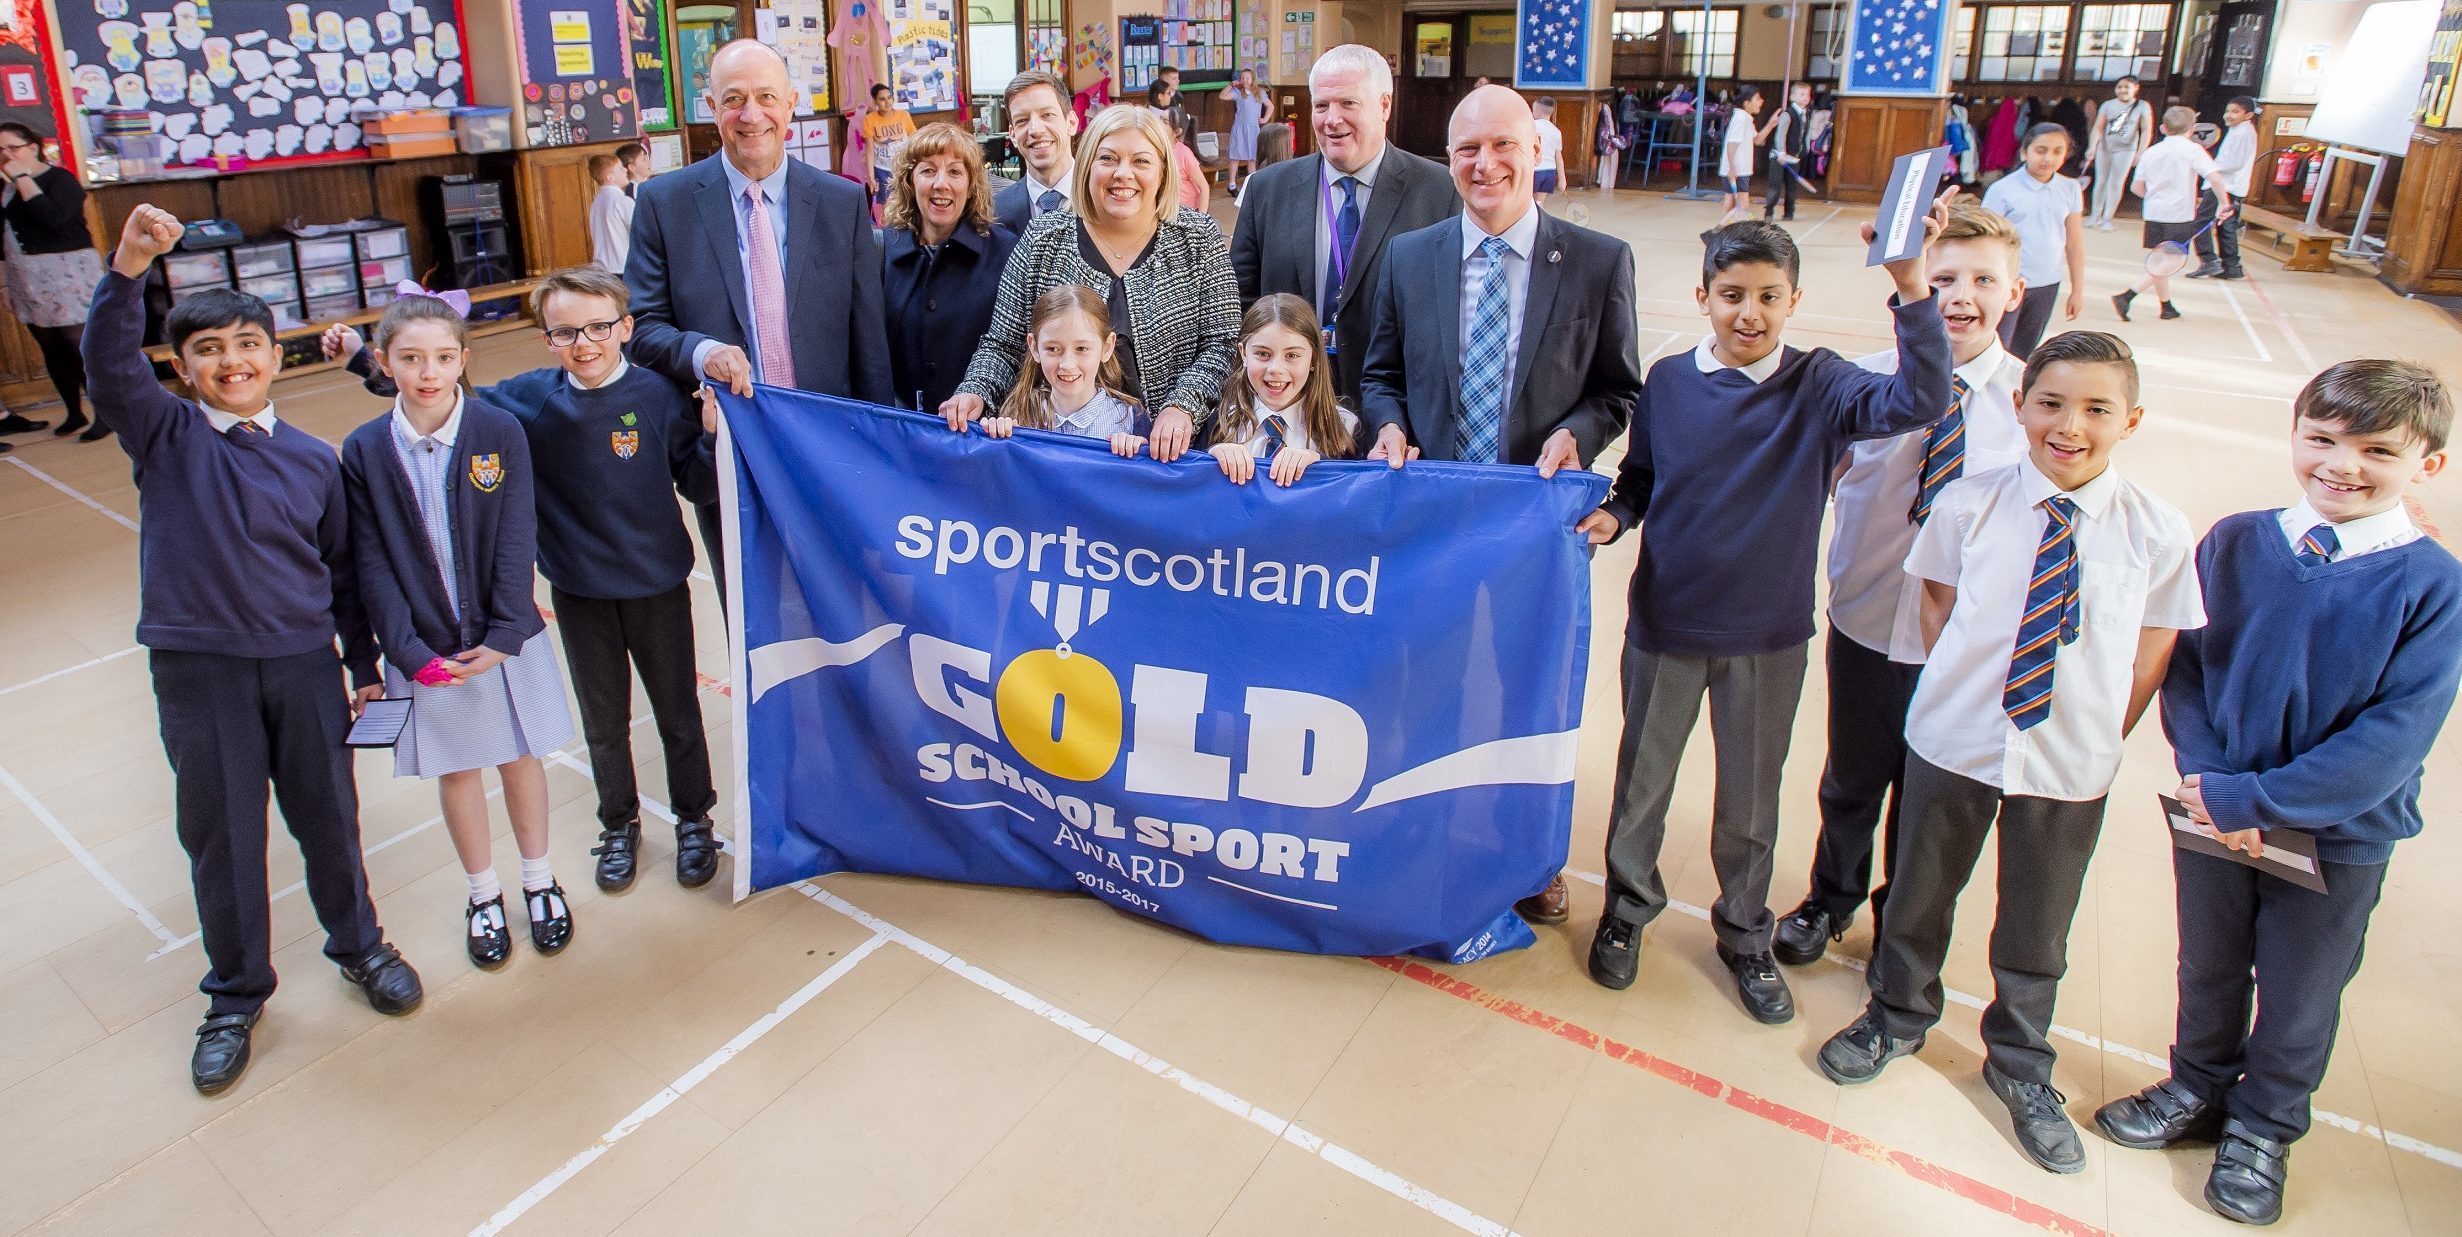 Pictured with children from Clepington Primary in picture number are, Stewart Harris sportscotland Chief Executive, Elaine Zwirlein Executive Director of Neighbourhood Services at Dundee City Council, Councillor John Alexander, Paula Cheghall Clepington Primary Head Teacher, Paul Clancy Executive Director of Children and Family Service at Dundee City Council and Joe FitzPatrick Minister for Parliamentary Business.